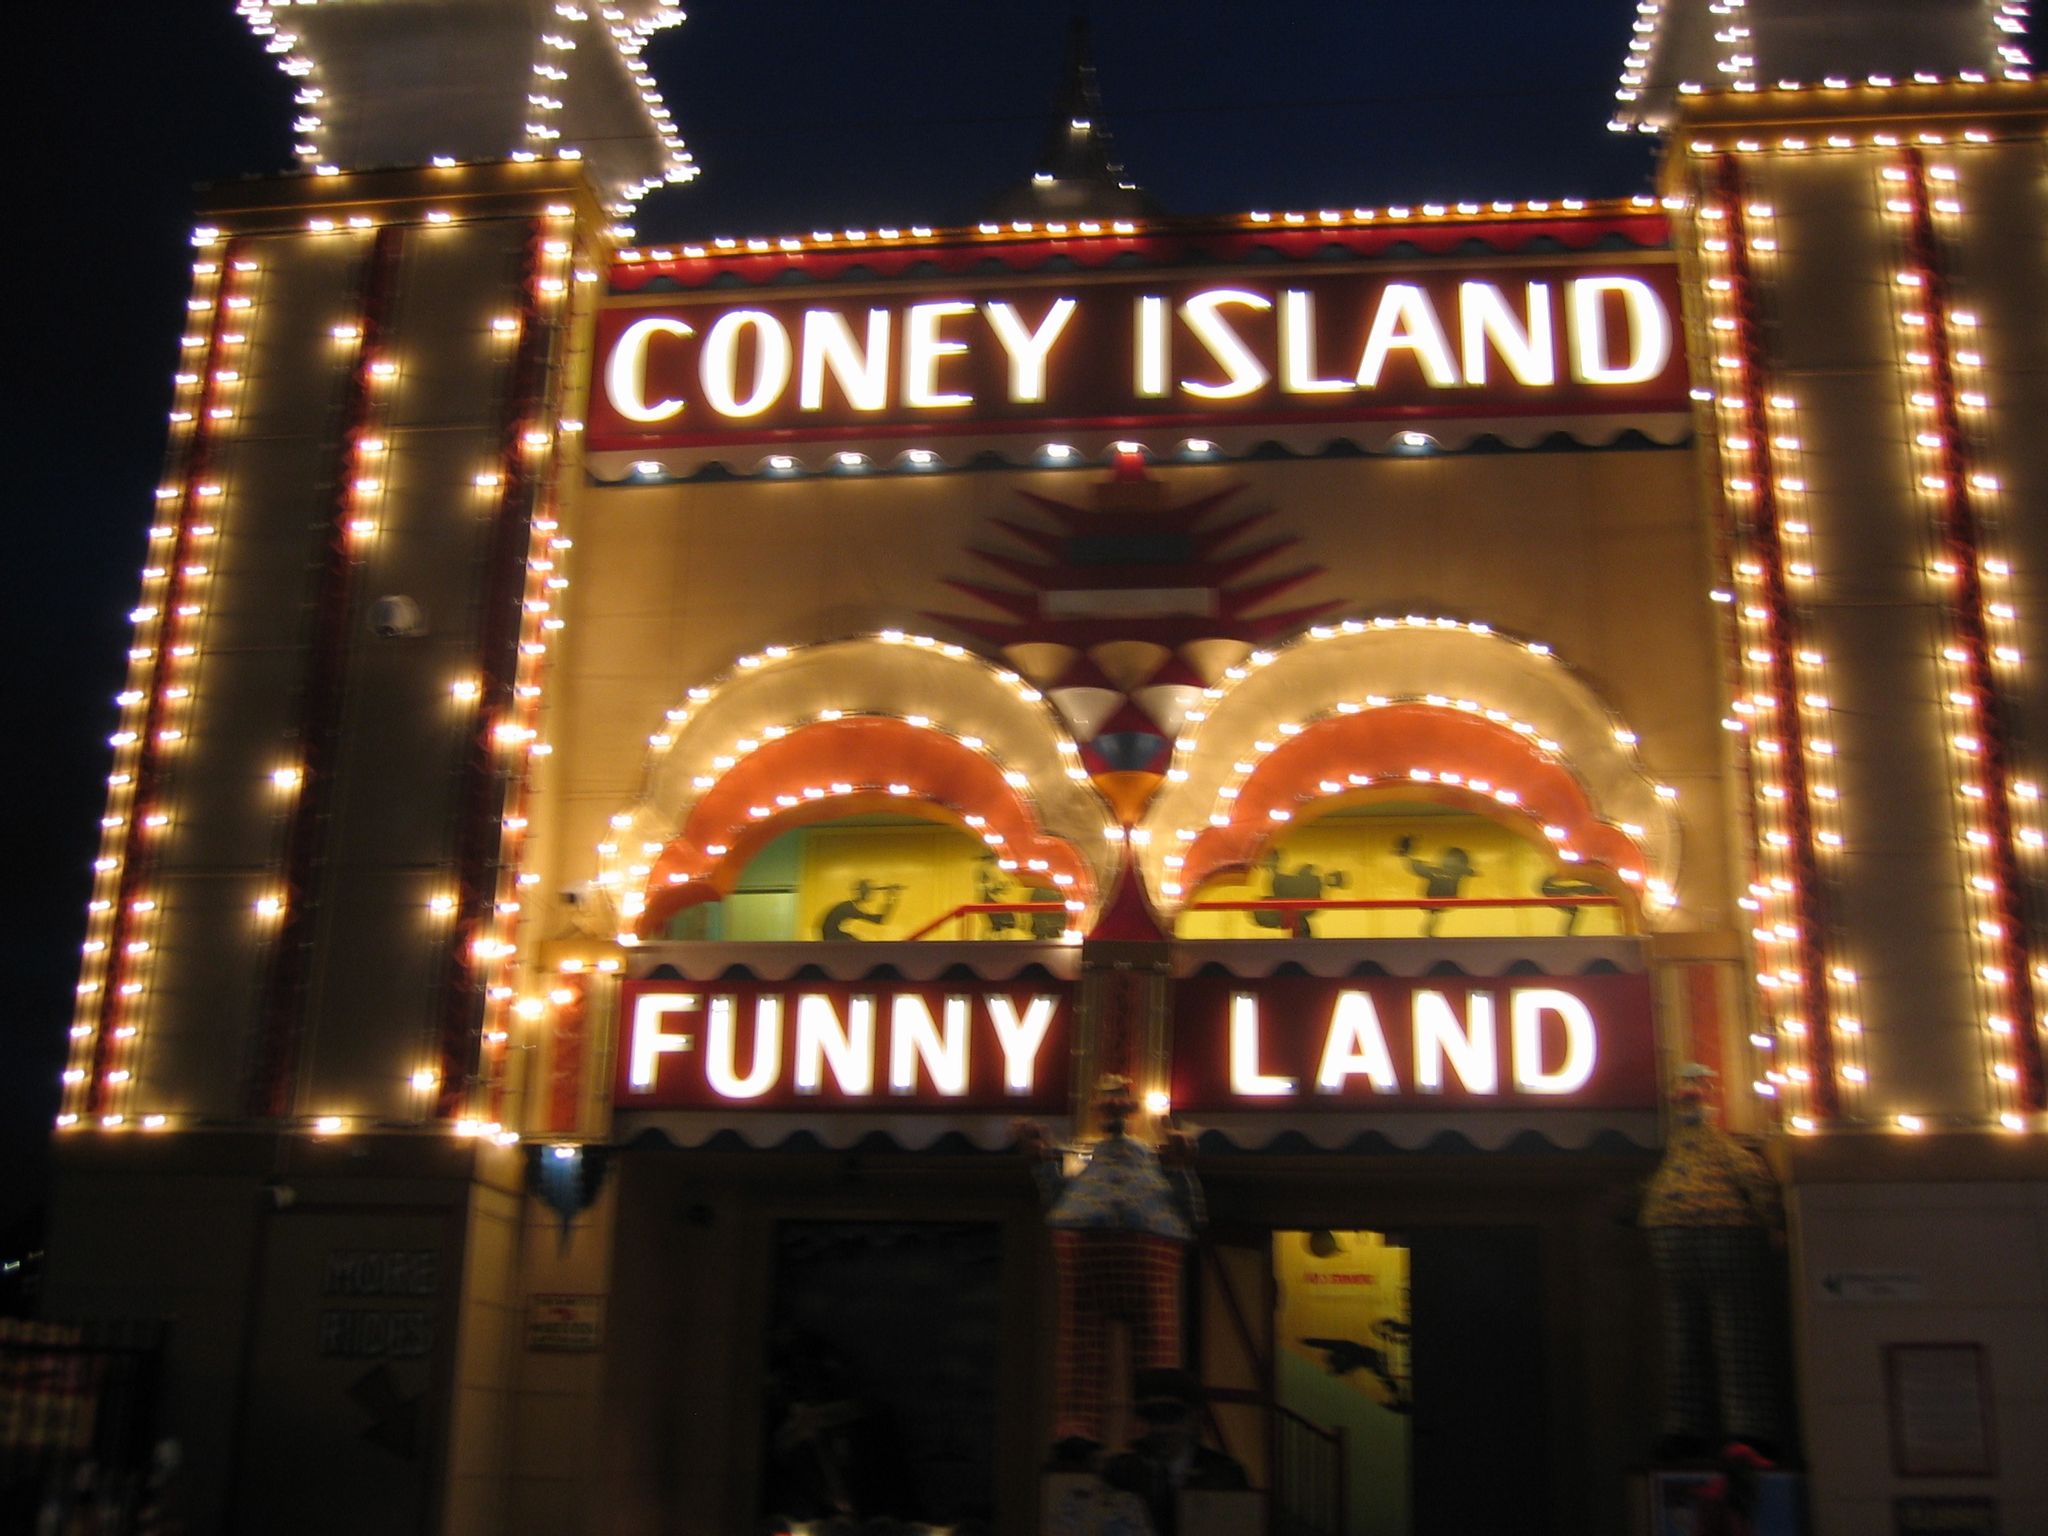 A photo of a lit-up entrance that says "Coney Island - Funny Land" in big glowing letters.